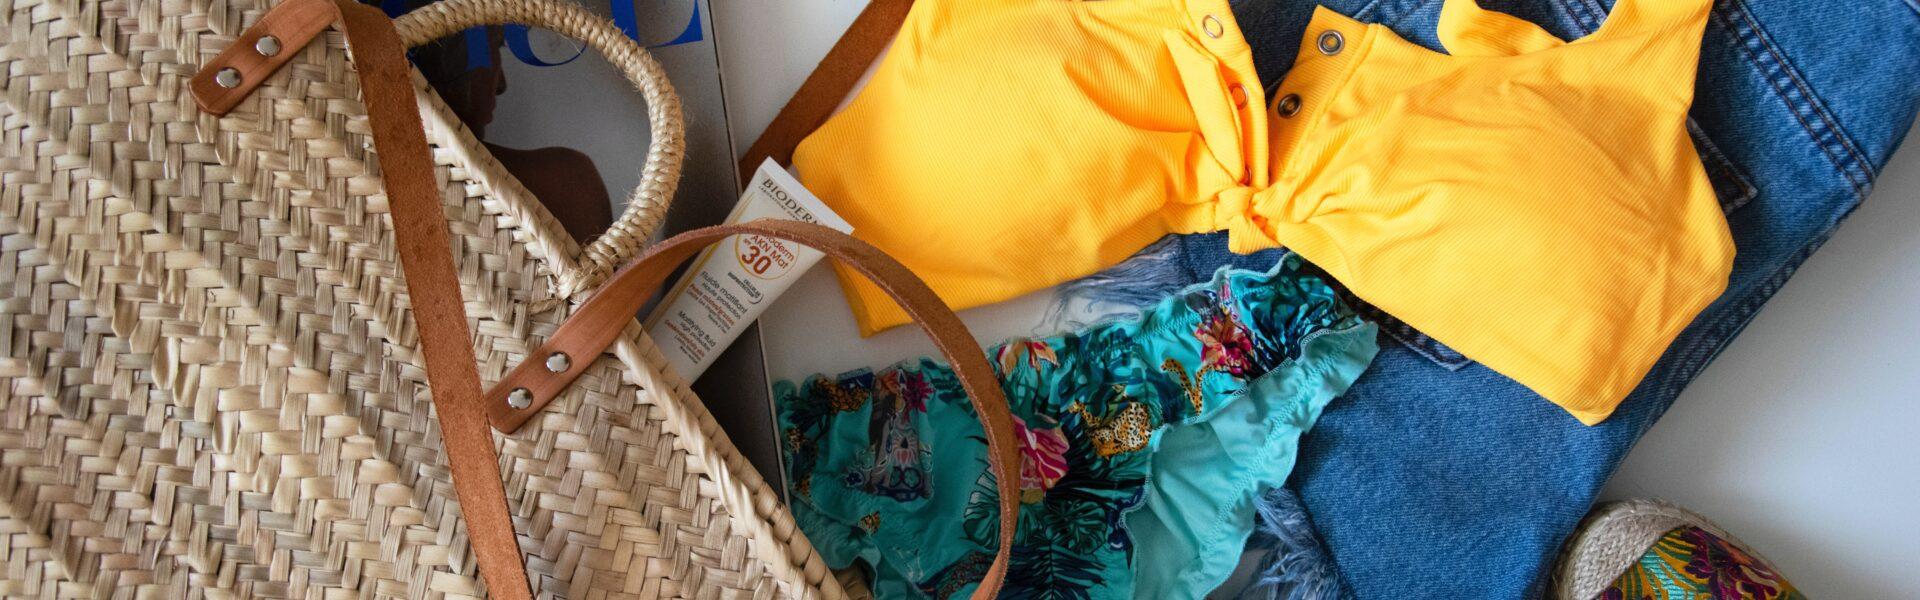 6 Summer Travel Tips for Your Next Getaway to the Beach